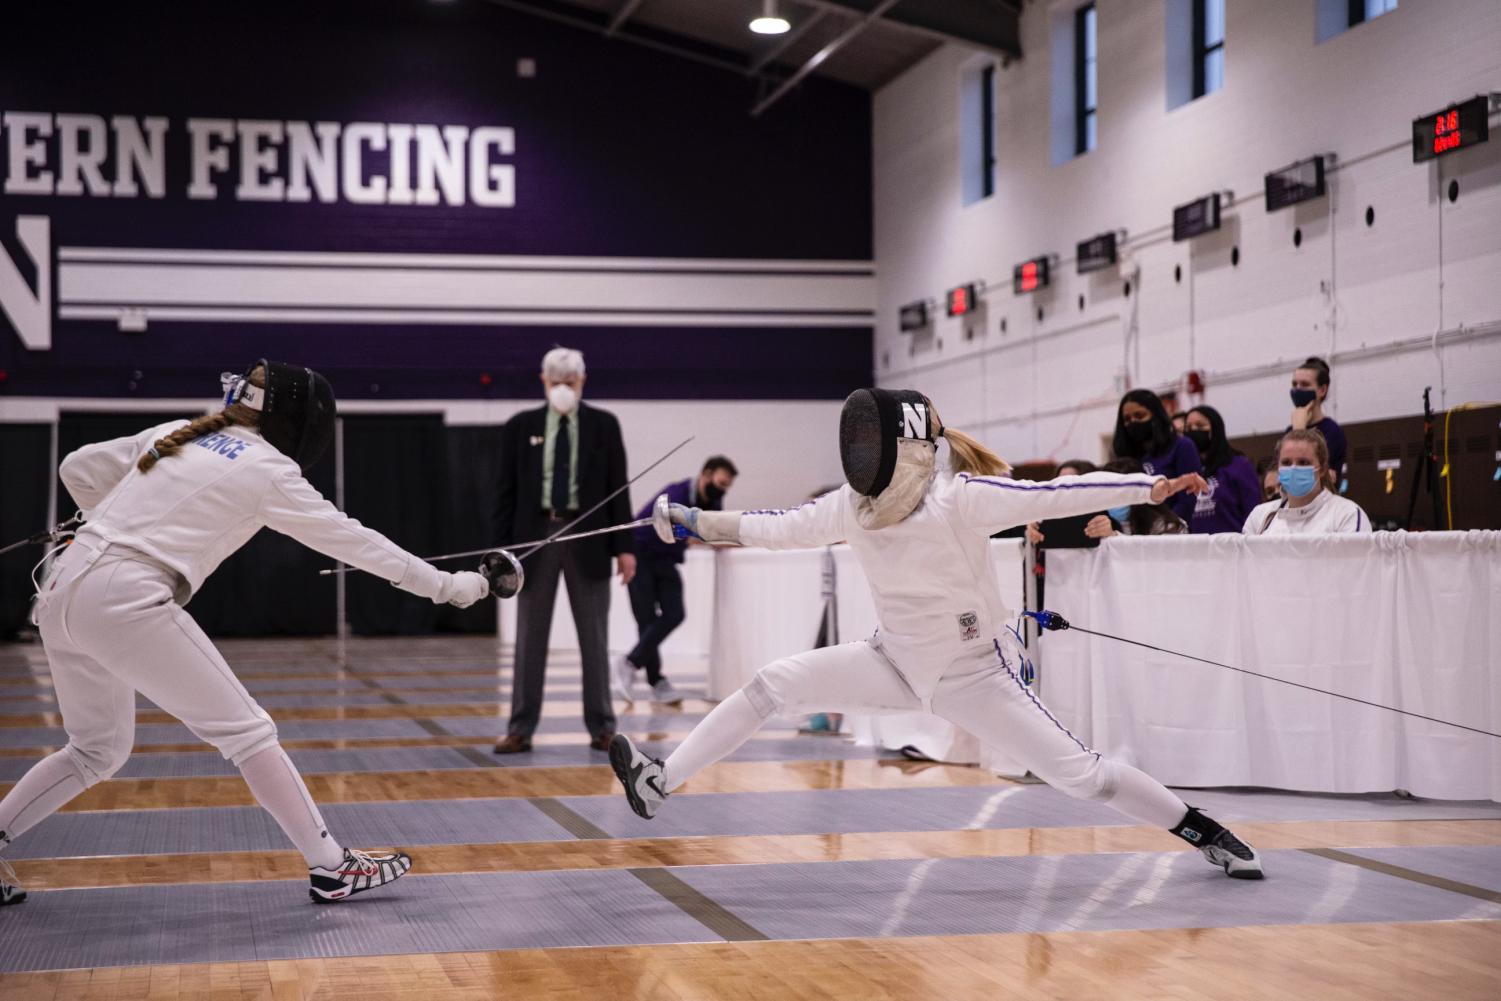 A+fencer+wearing+white+and+purple+gear+battles+in+an+epee+bout.